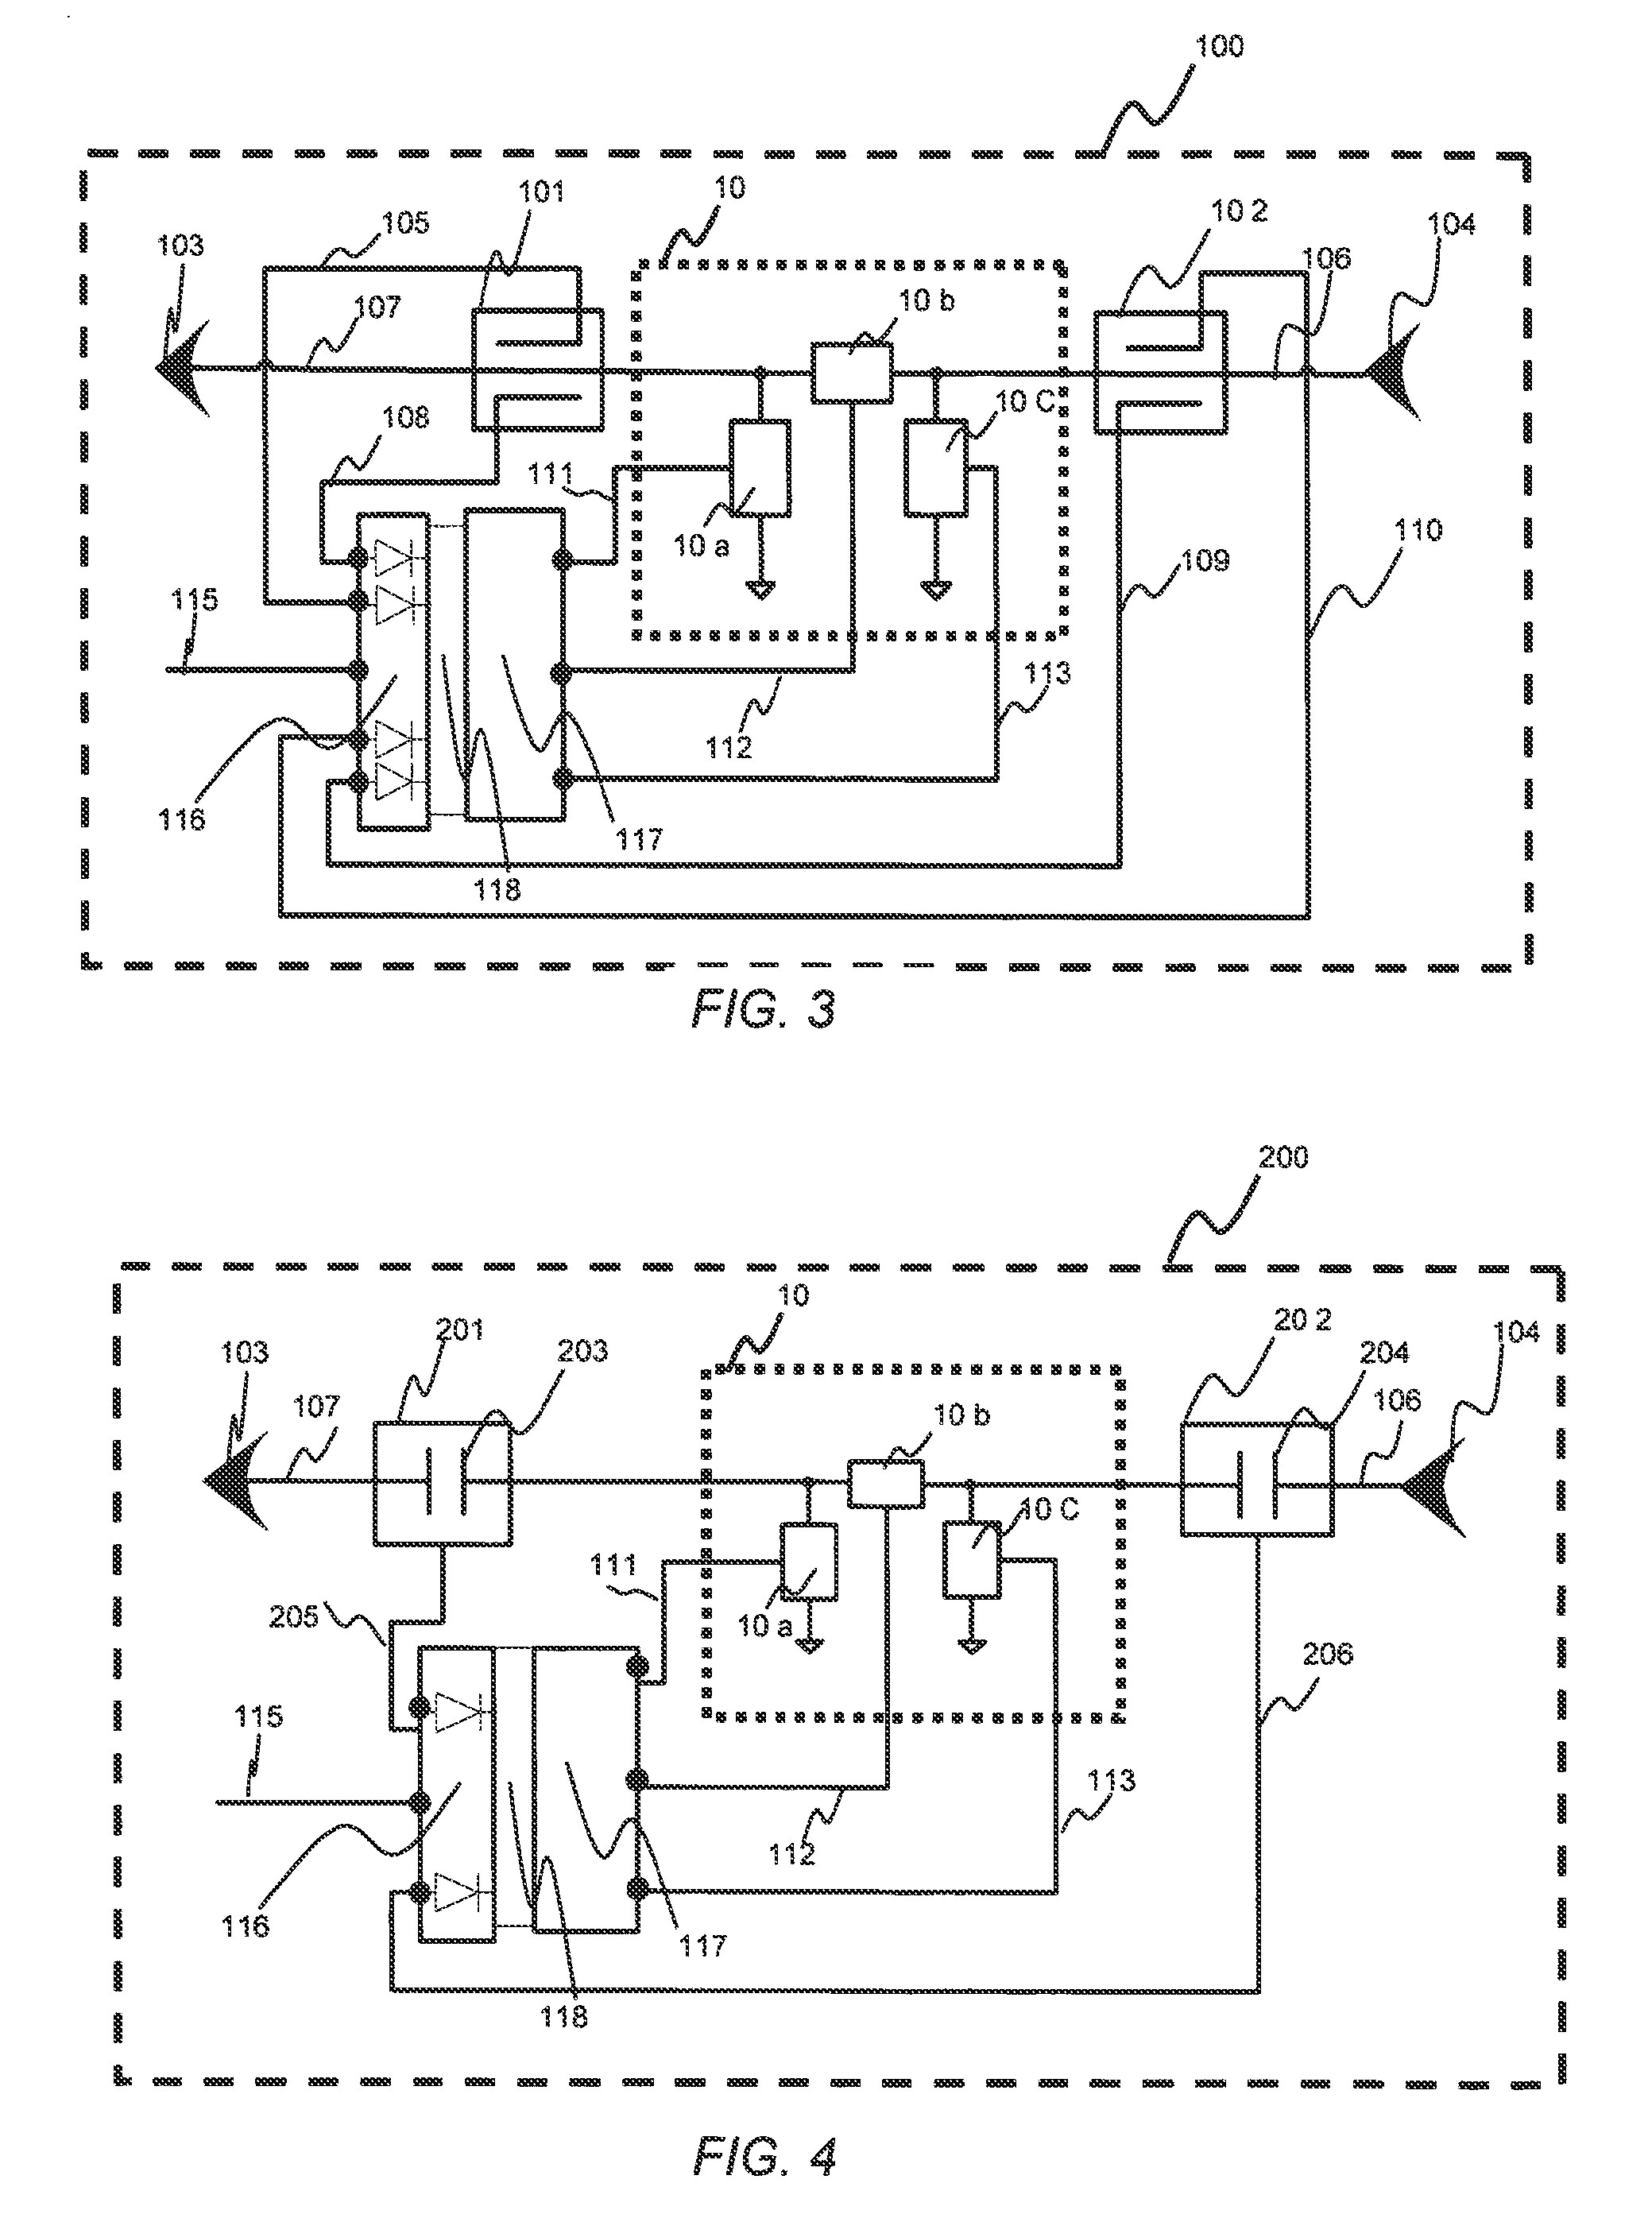 Tunable microwave devices with auto-adjusting matching circuit